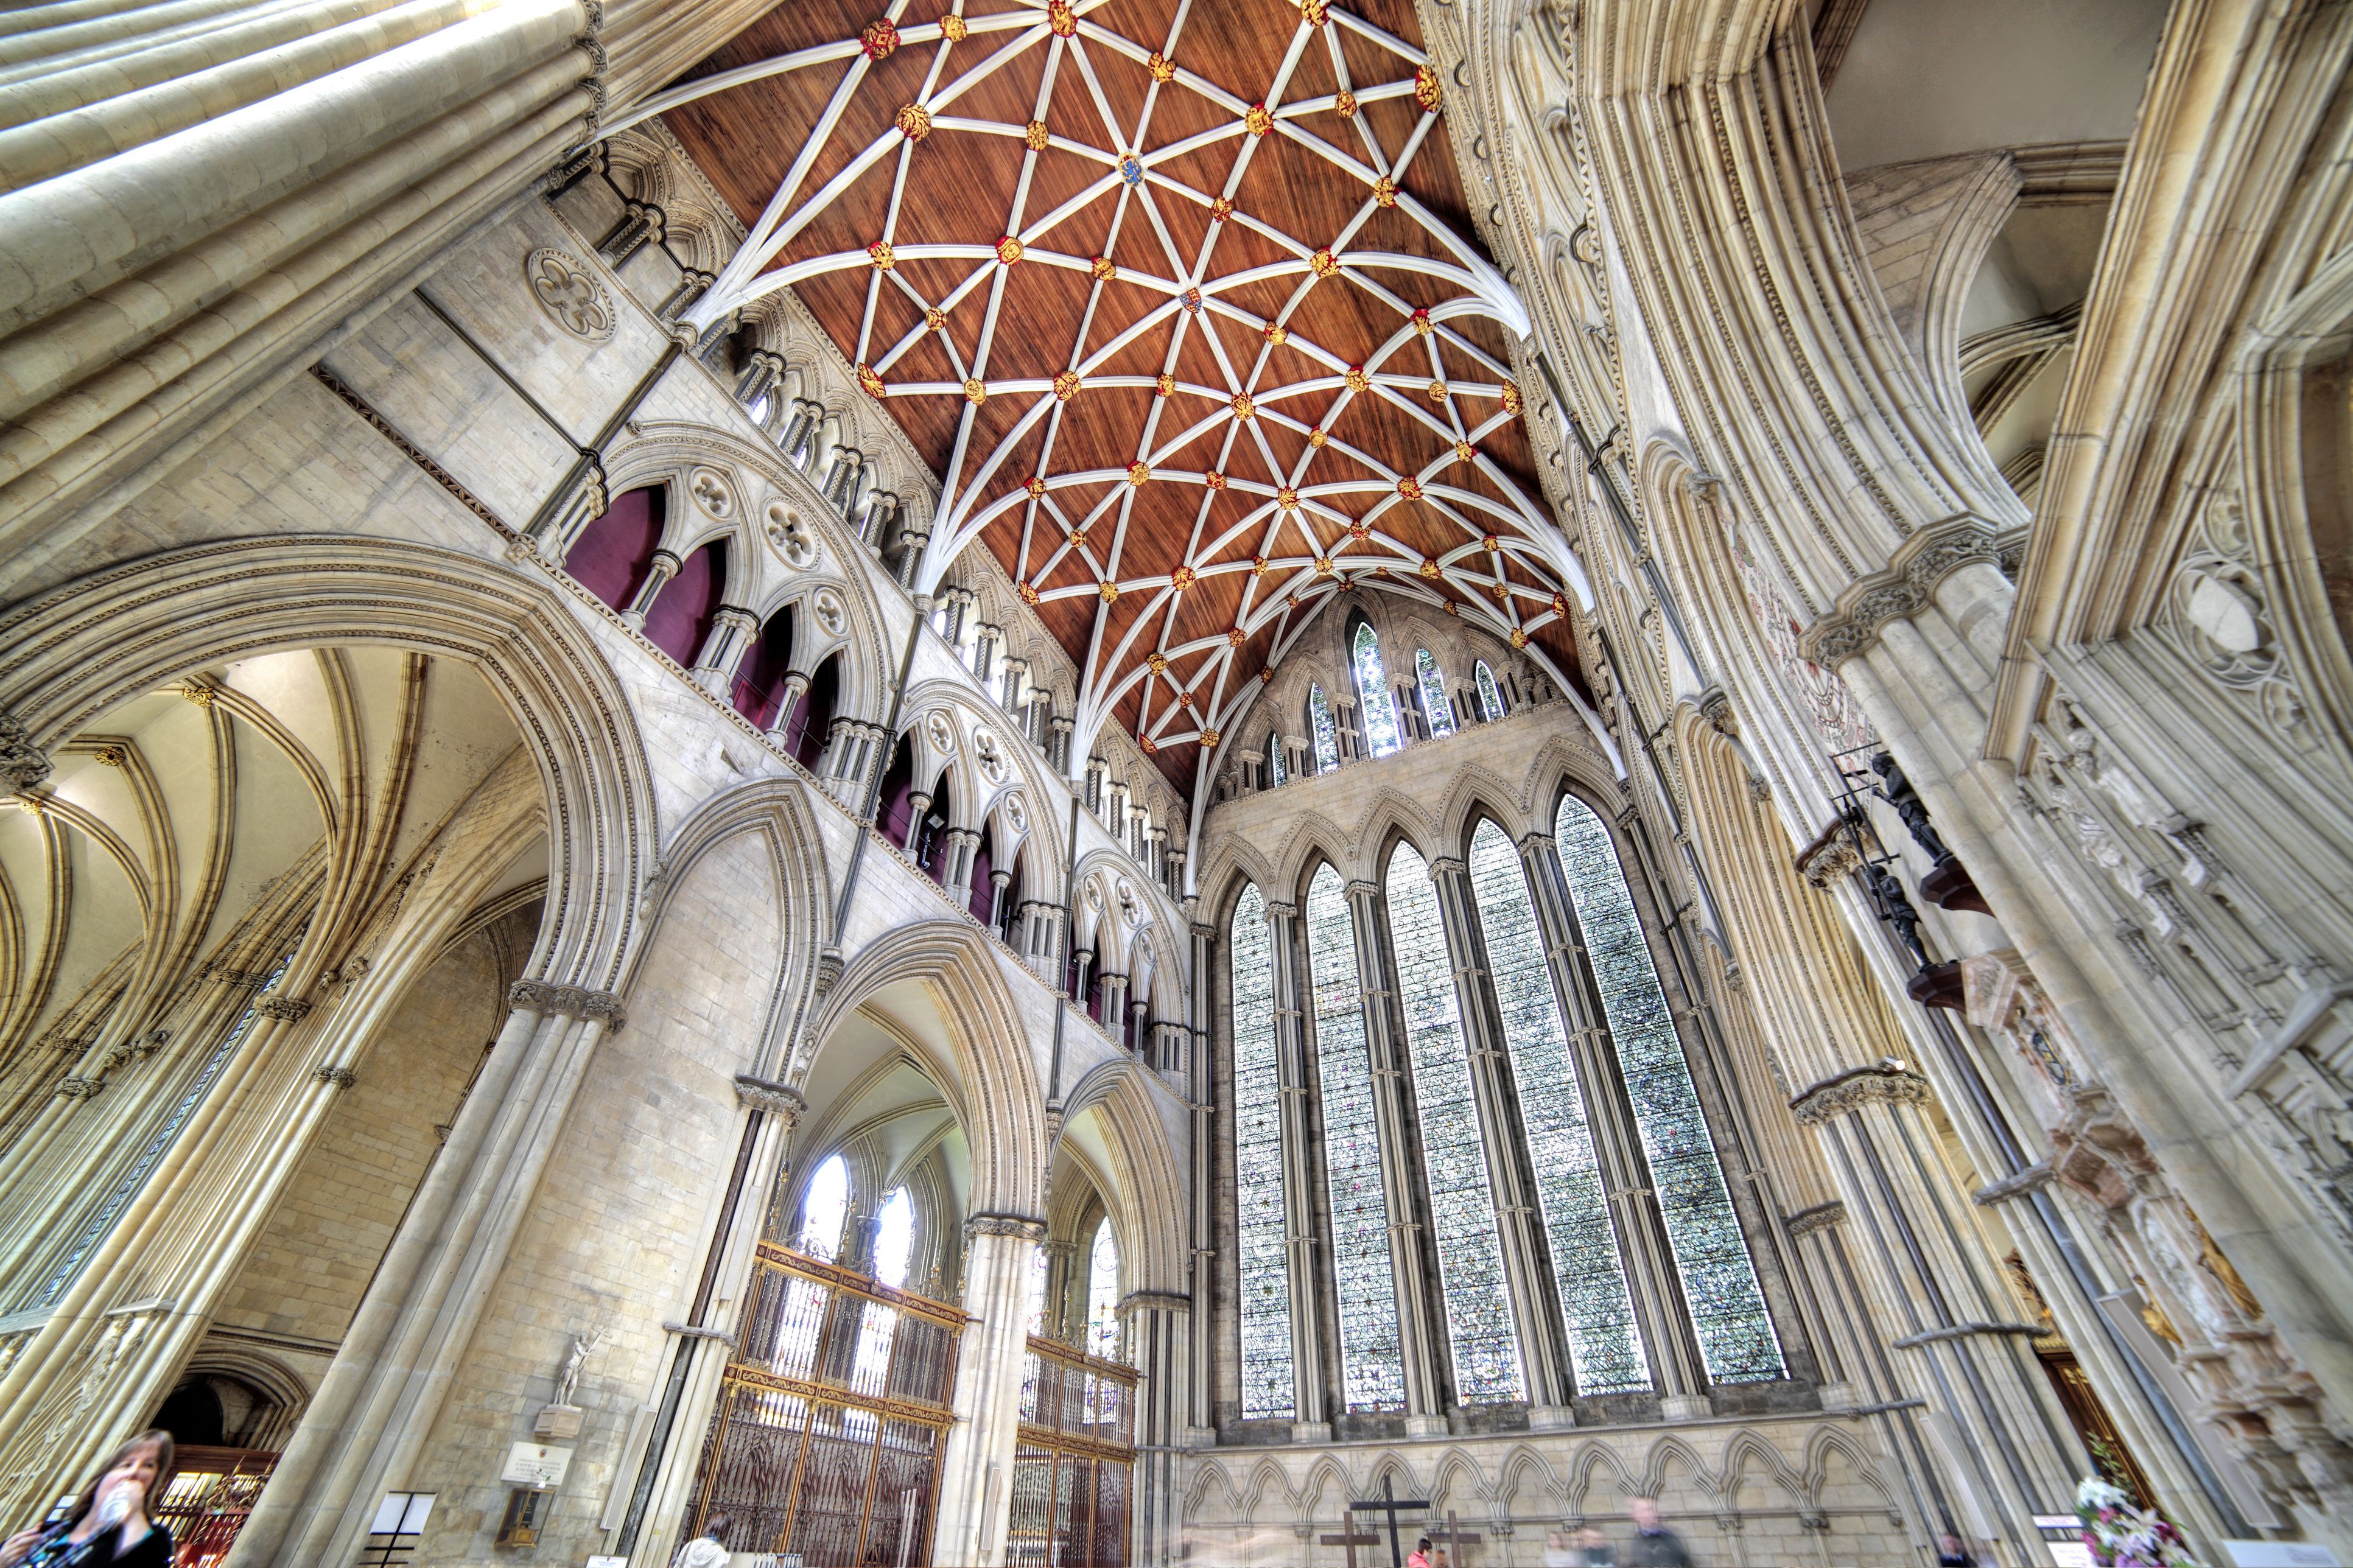 York Minster Facts and Figures